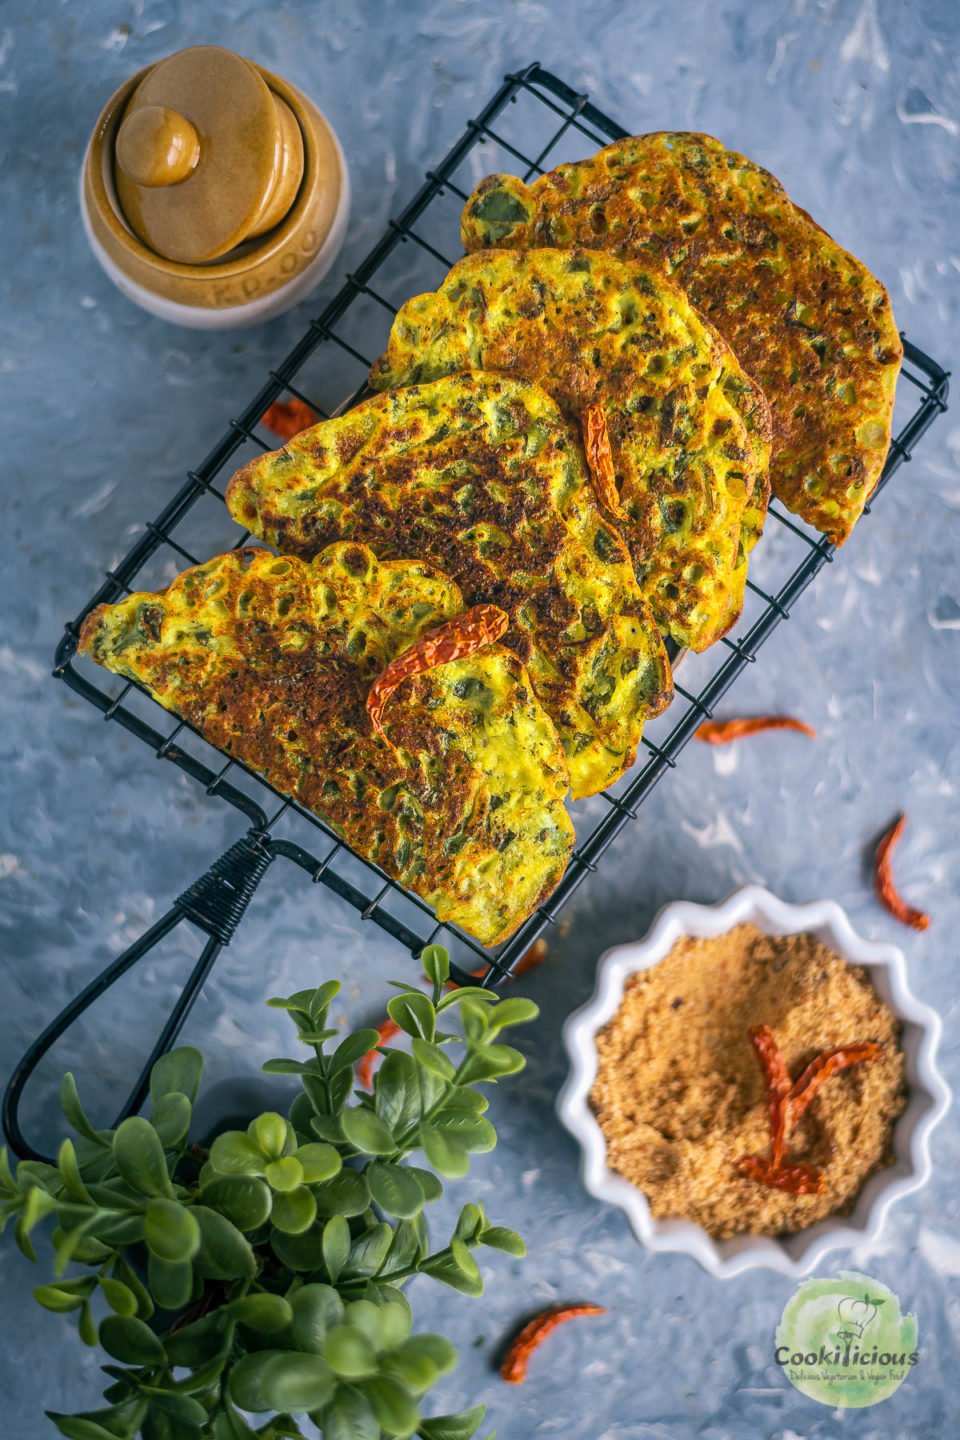 4 Methi Ghavan | Fenugreek Rice Flour Crepes folded and placed on a wire rack